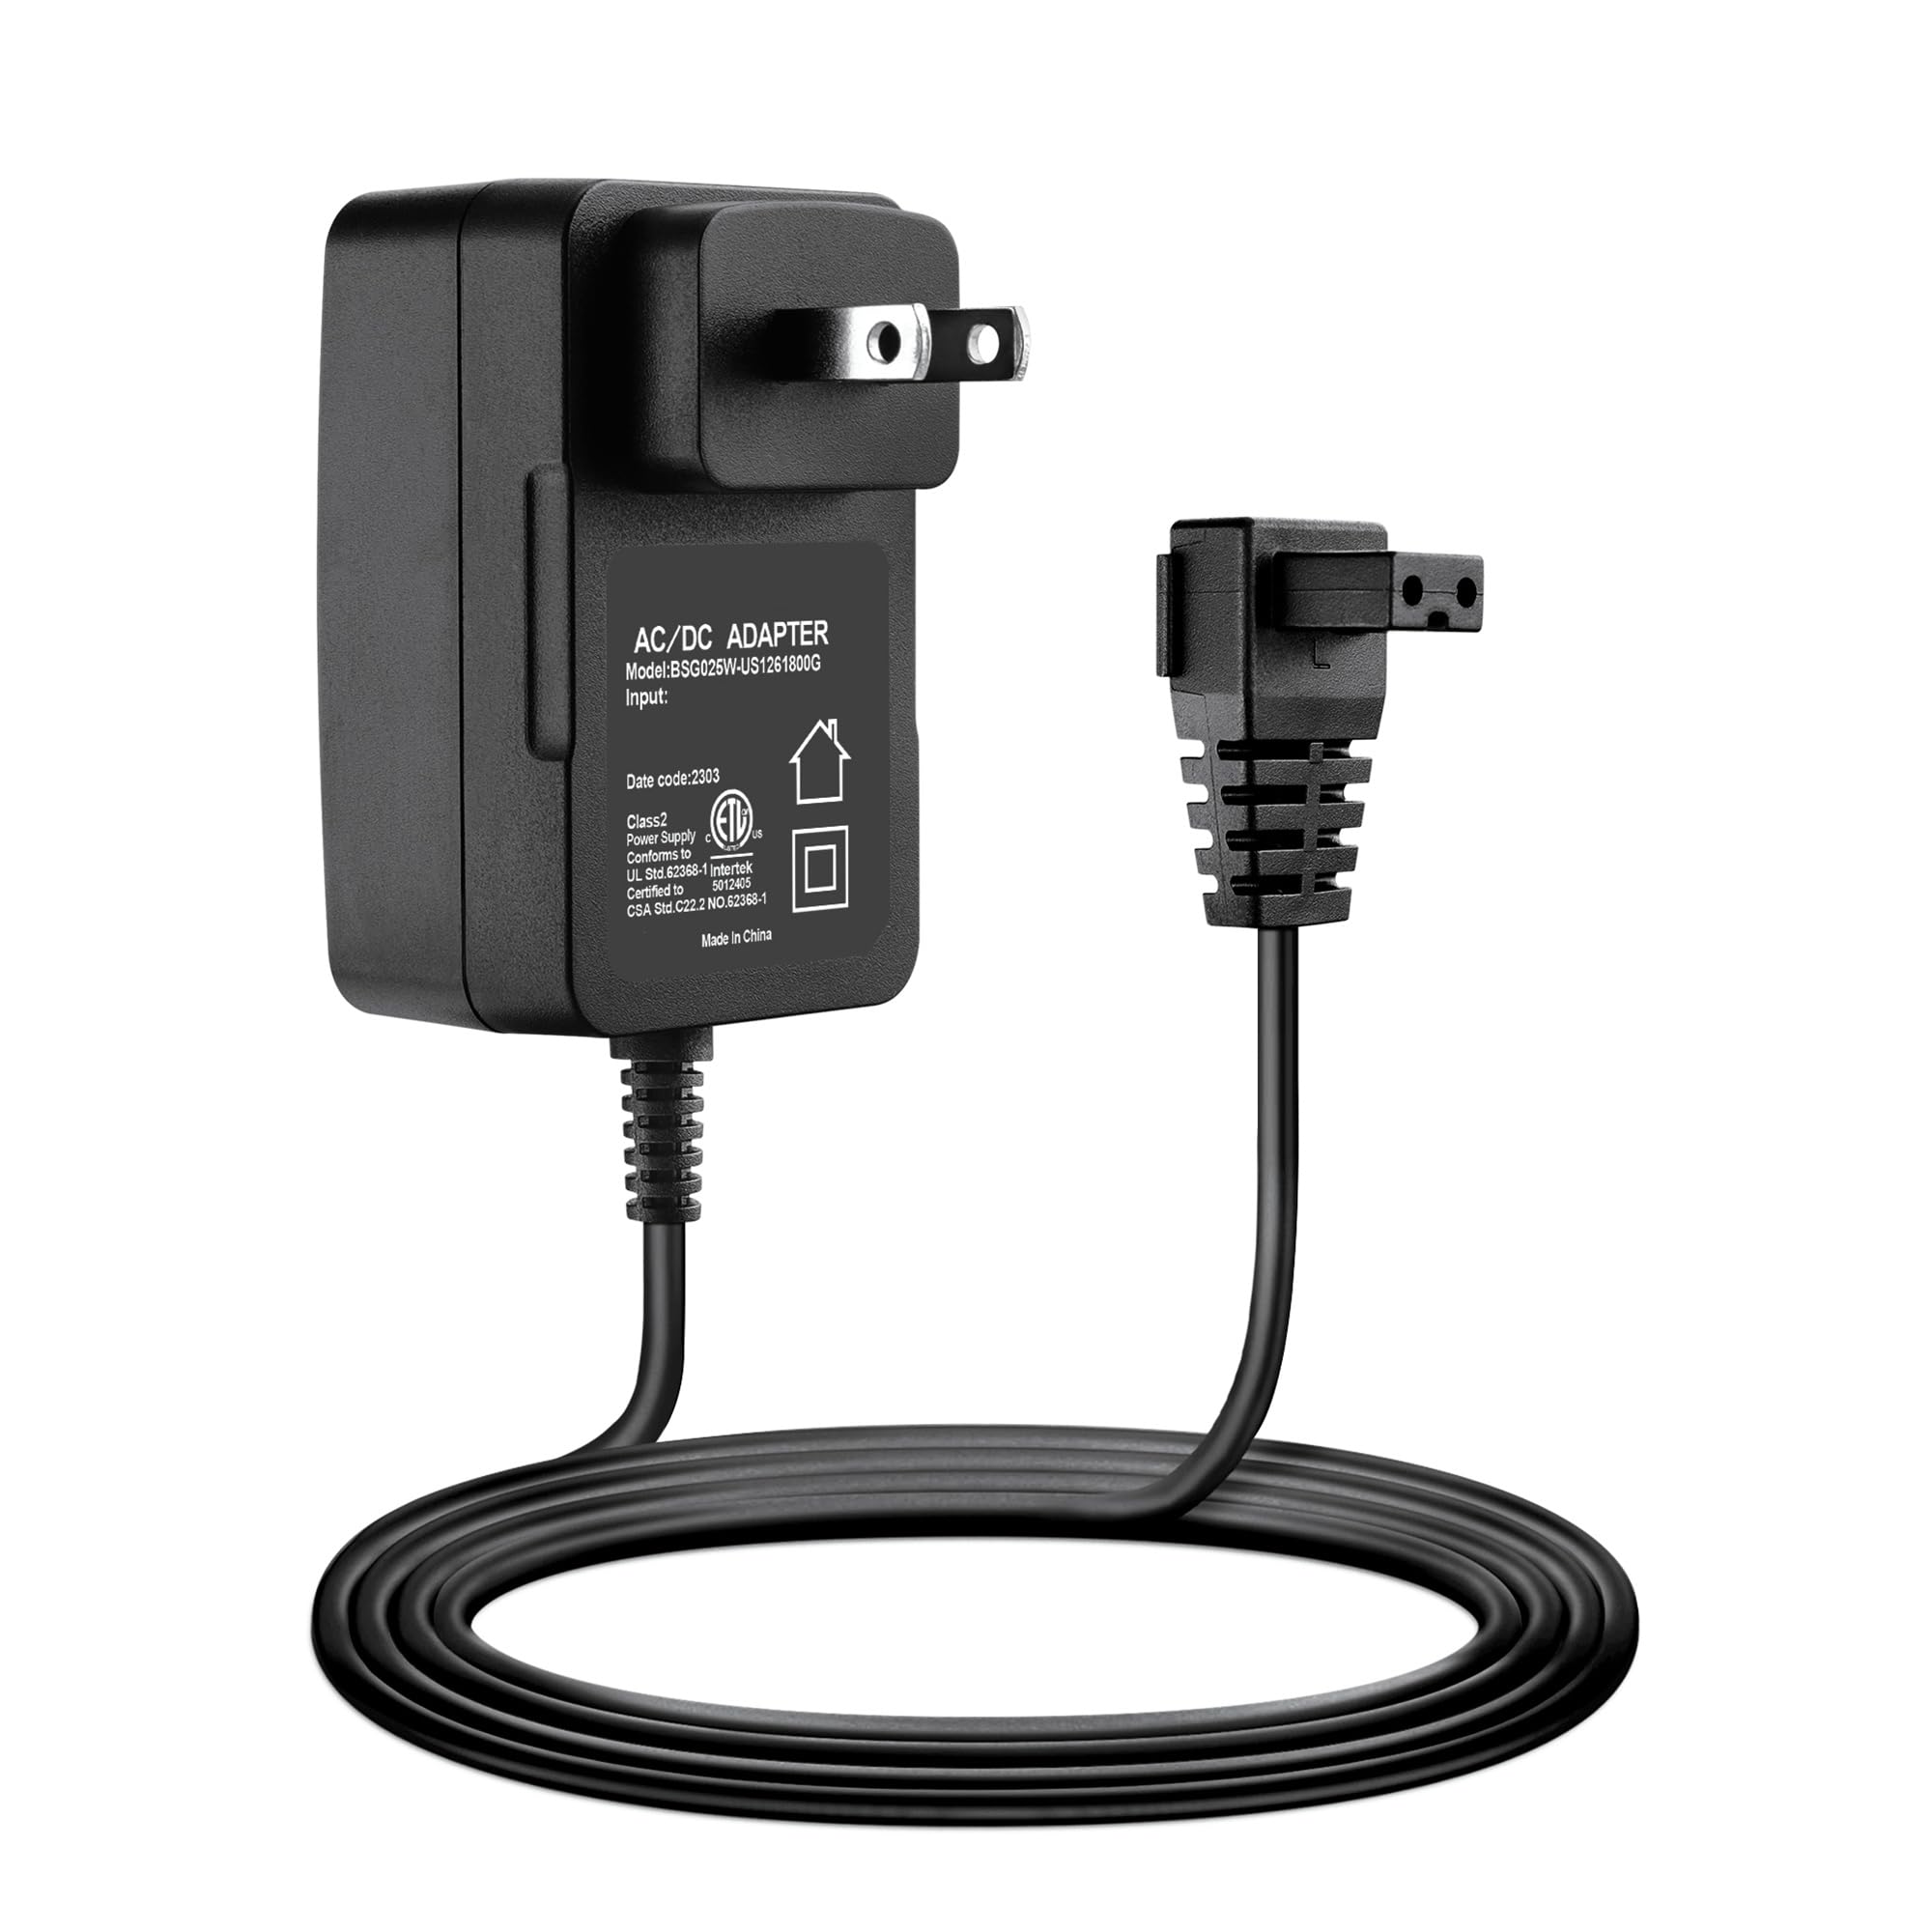 Jantoy AC Adapter Compatible with AIPER Seagull 1000 HJ1103J AIPURY1000 Pool Cleaner Power Charger